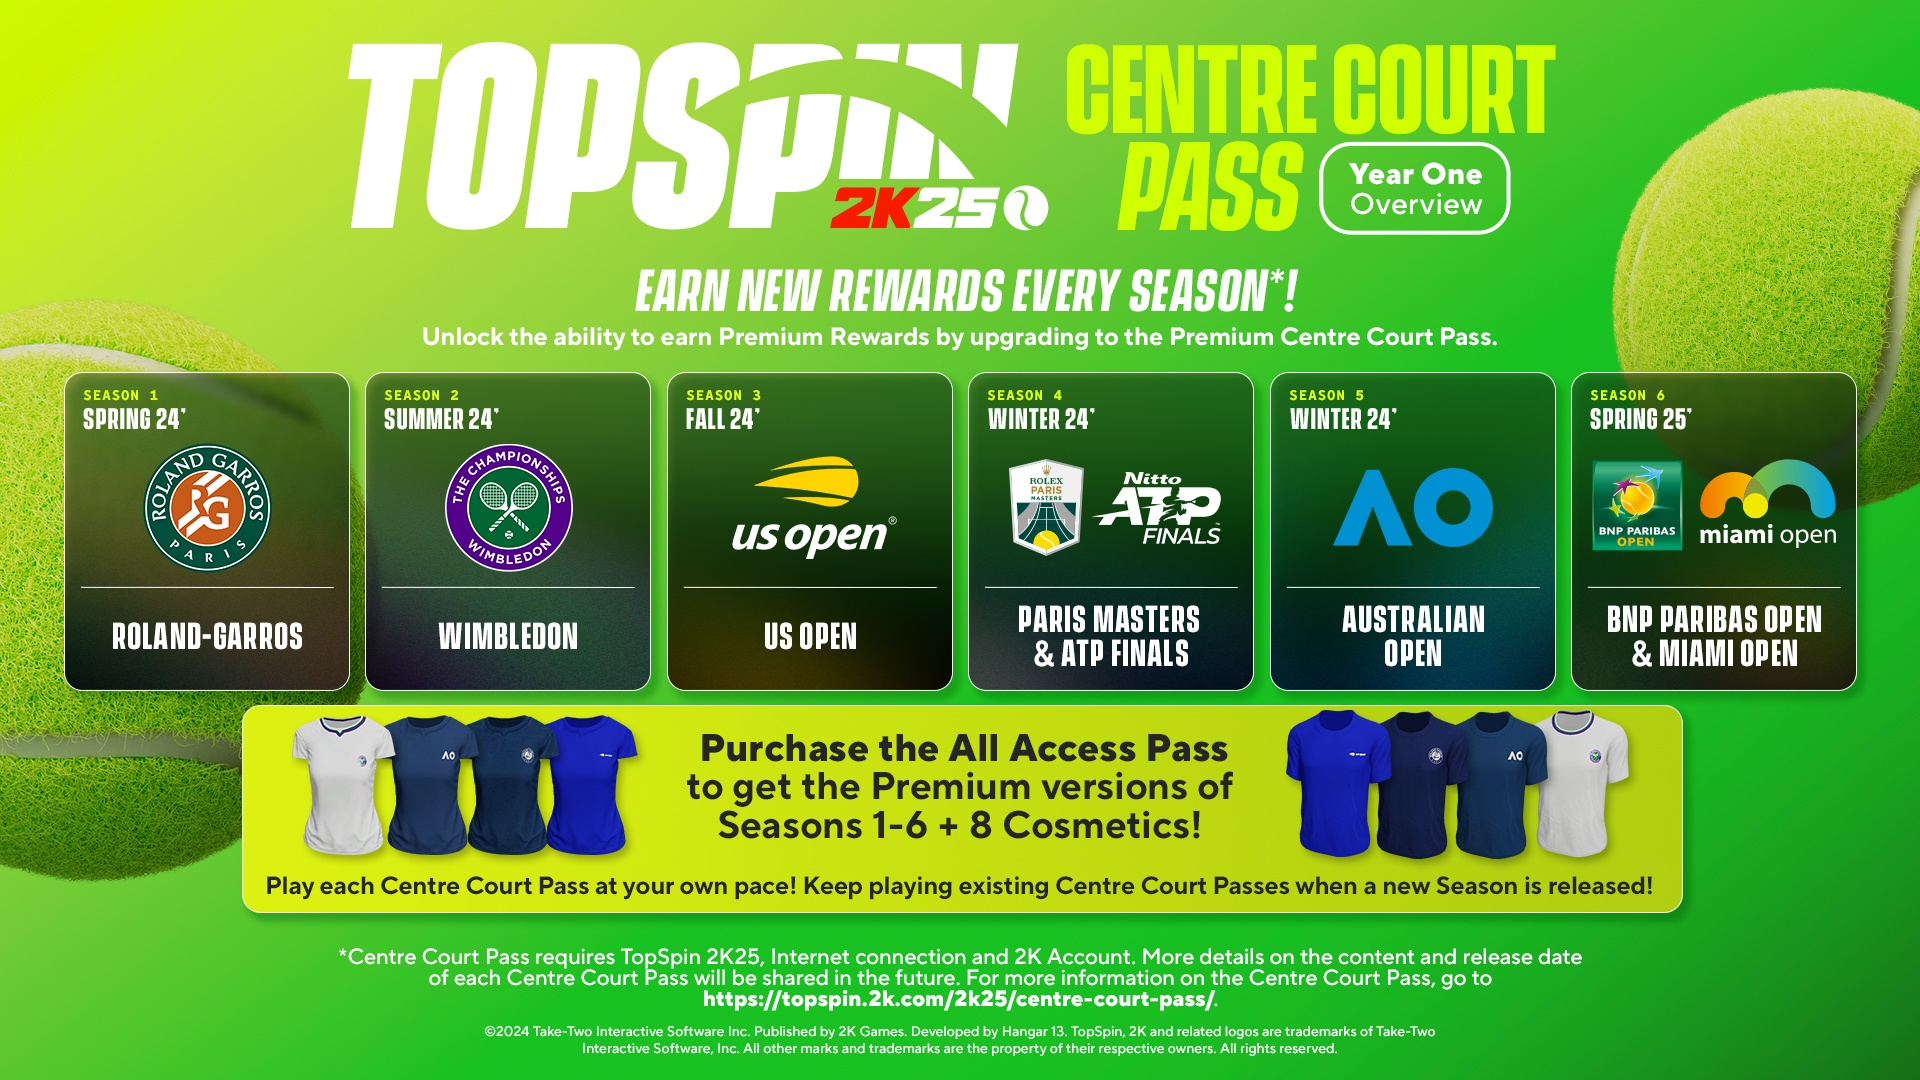 TOPSPIN25 | Centre Court Pass Hub | YEAR ONE OVERVIEW